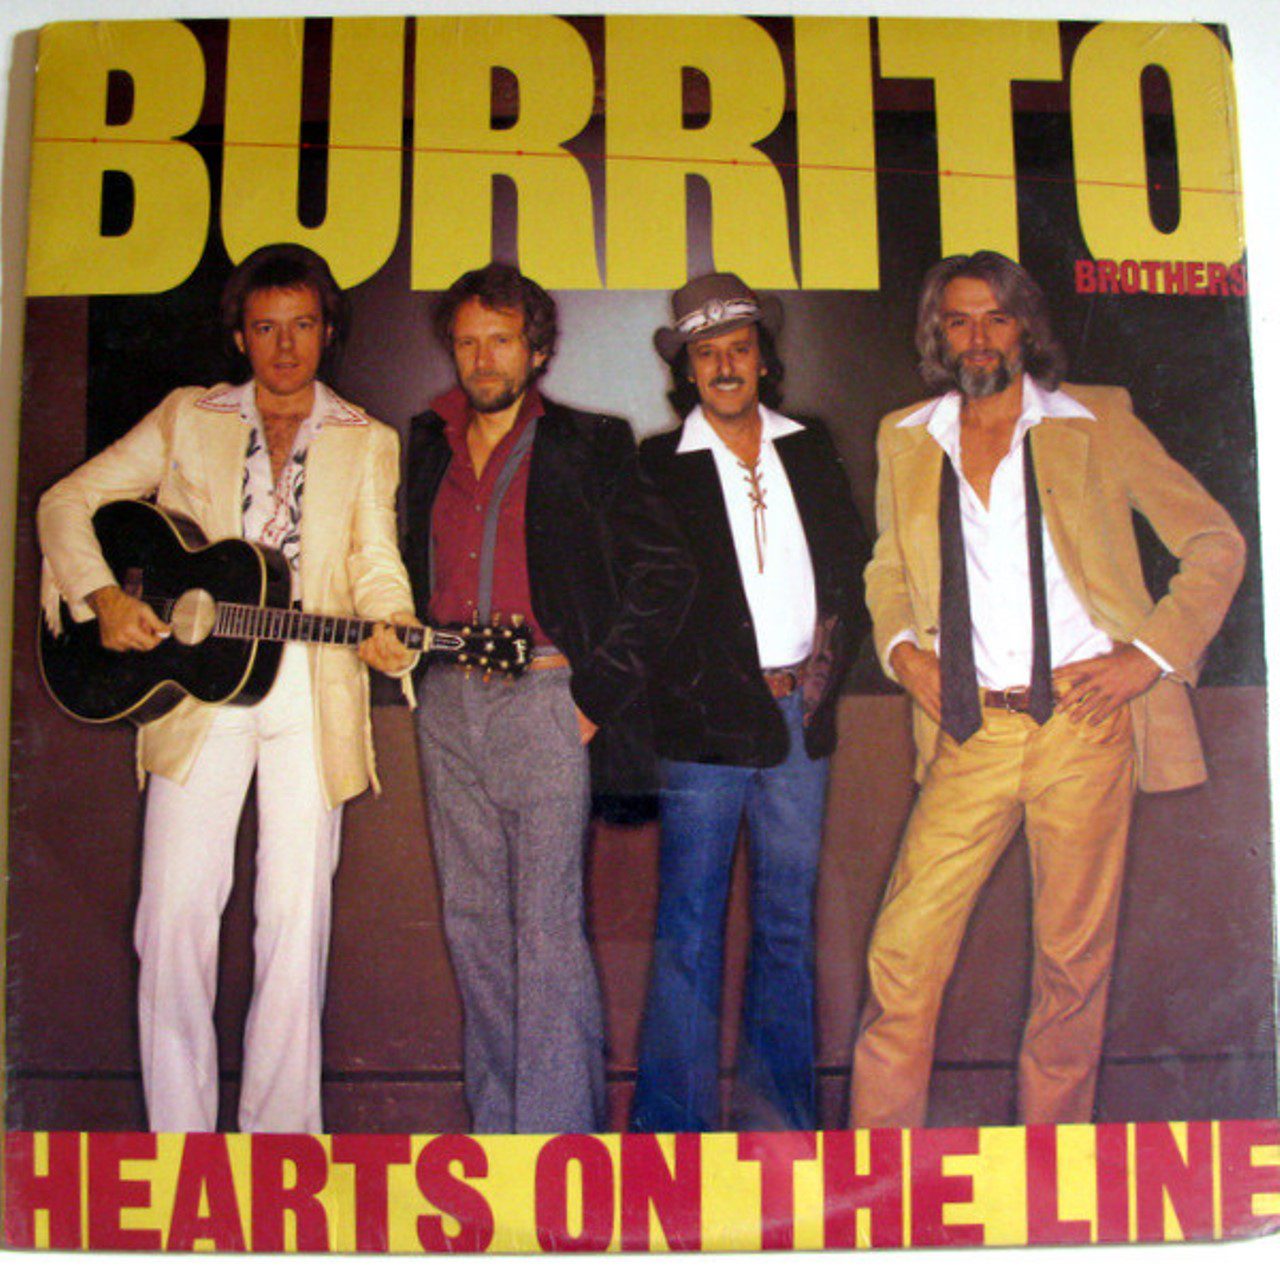 Flying Burrito Brothers – Hearts On The Line cover album